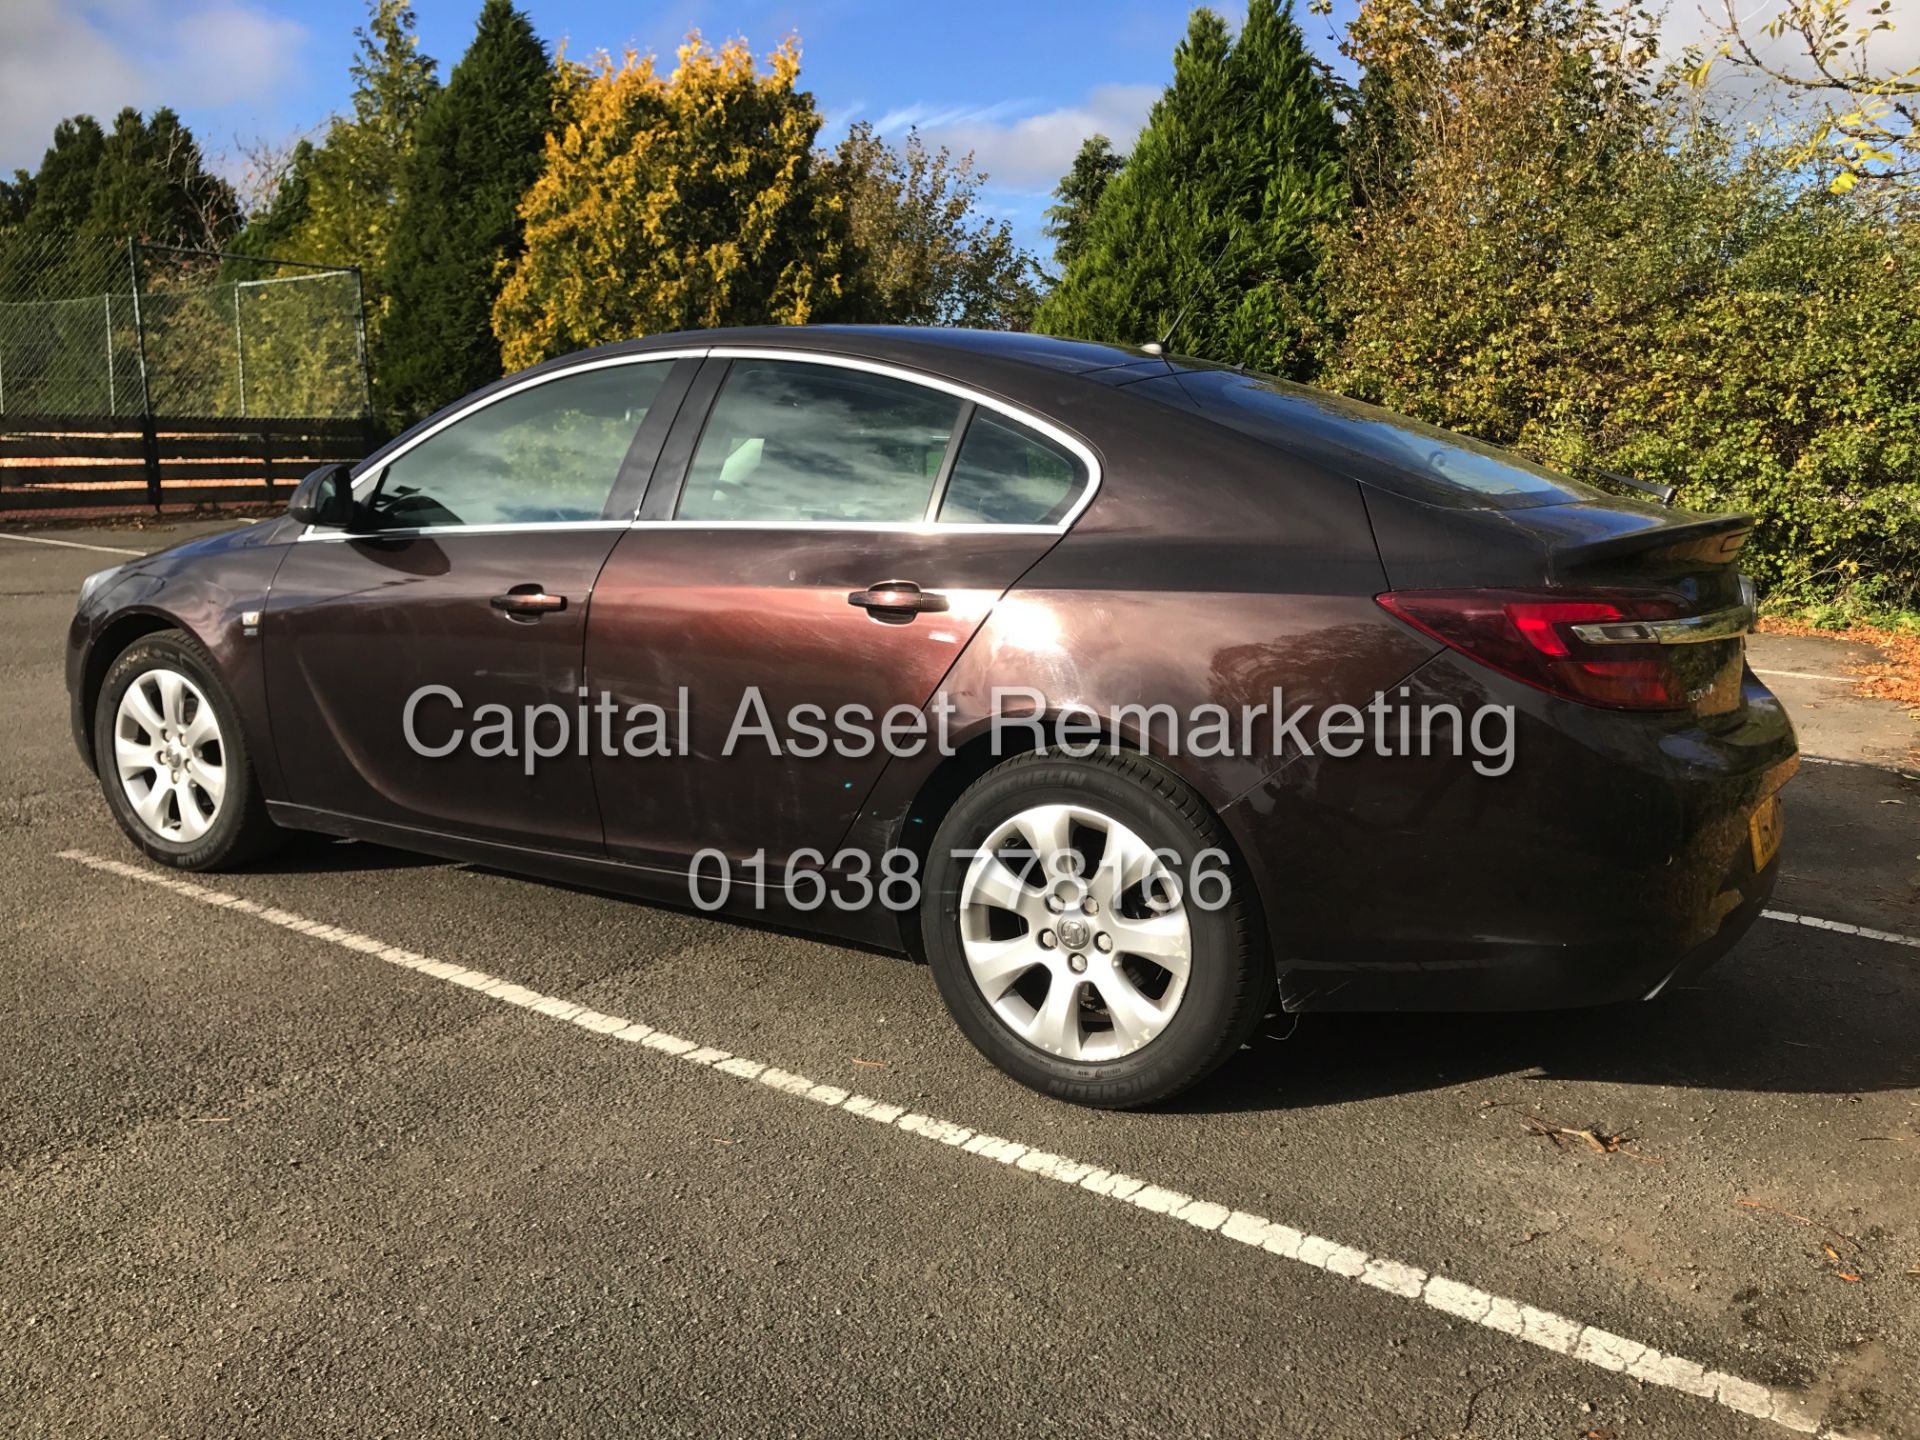 VAUXHALL INSIGNIA 2.0CDTI "SE" HATCHBACK (14 REG - NEW SHAPE) ONLY 70K MILES - 1 OWNER - WOW!! - Image 7 of 18